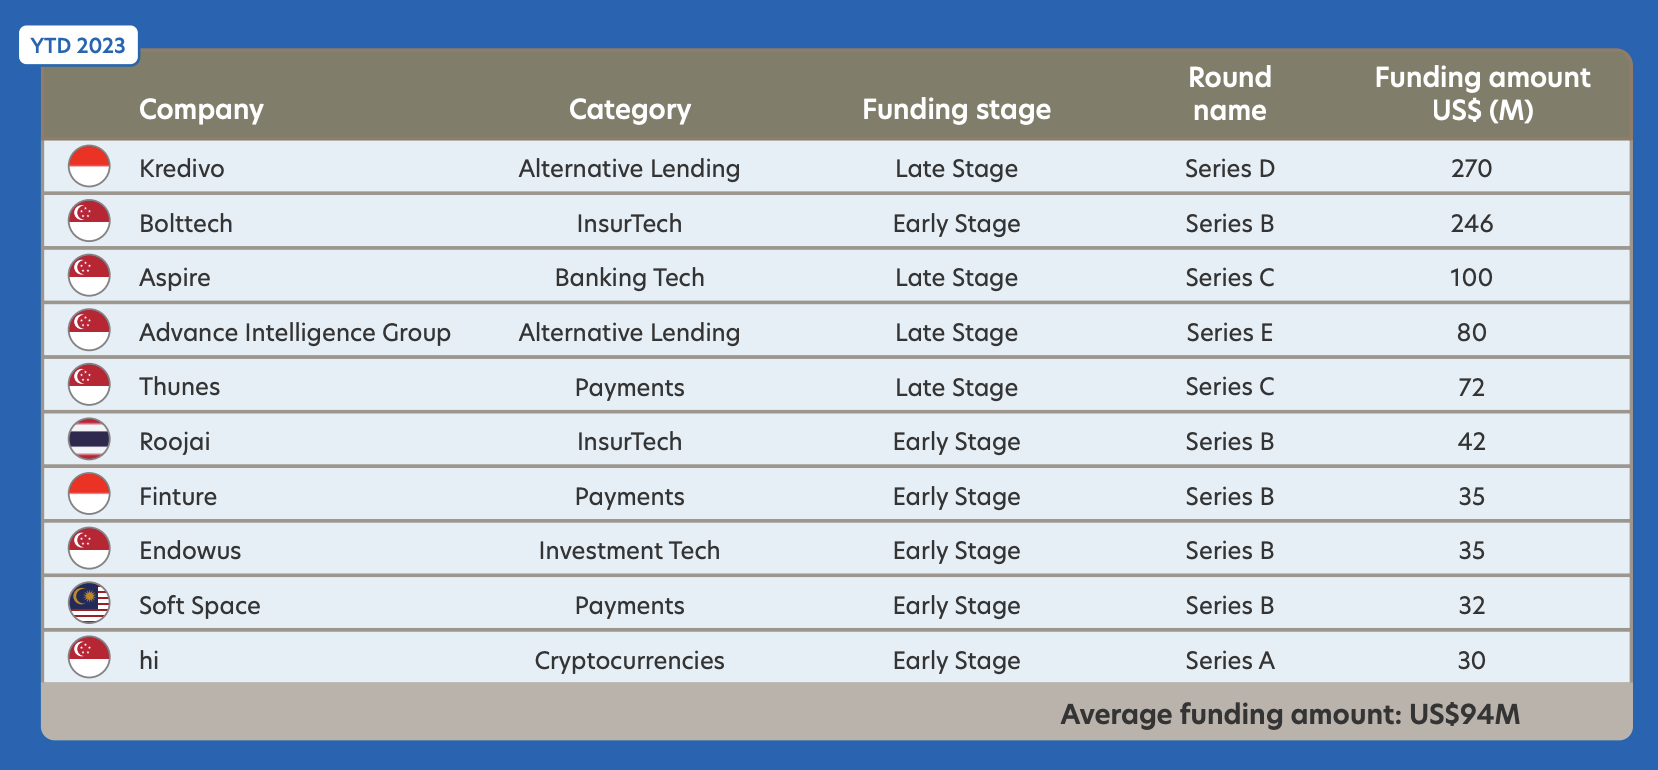 Largest fintech rounds of funding in ASEAN-6 in the first nine months of 2023, Source: Fintech in ASEAN 2023: Seeding the Green Transition, UOB, PwC Singapore and the Singapore Fintech Association (SFA), Nov 2023